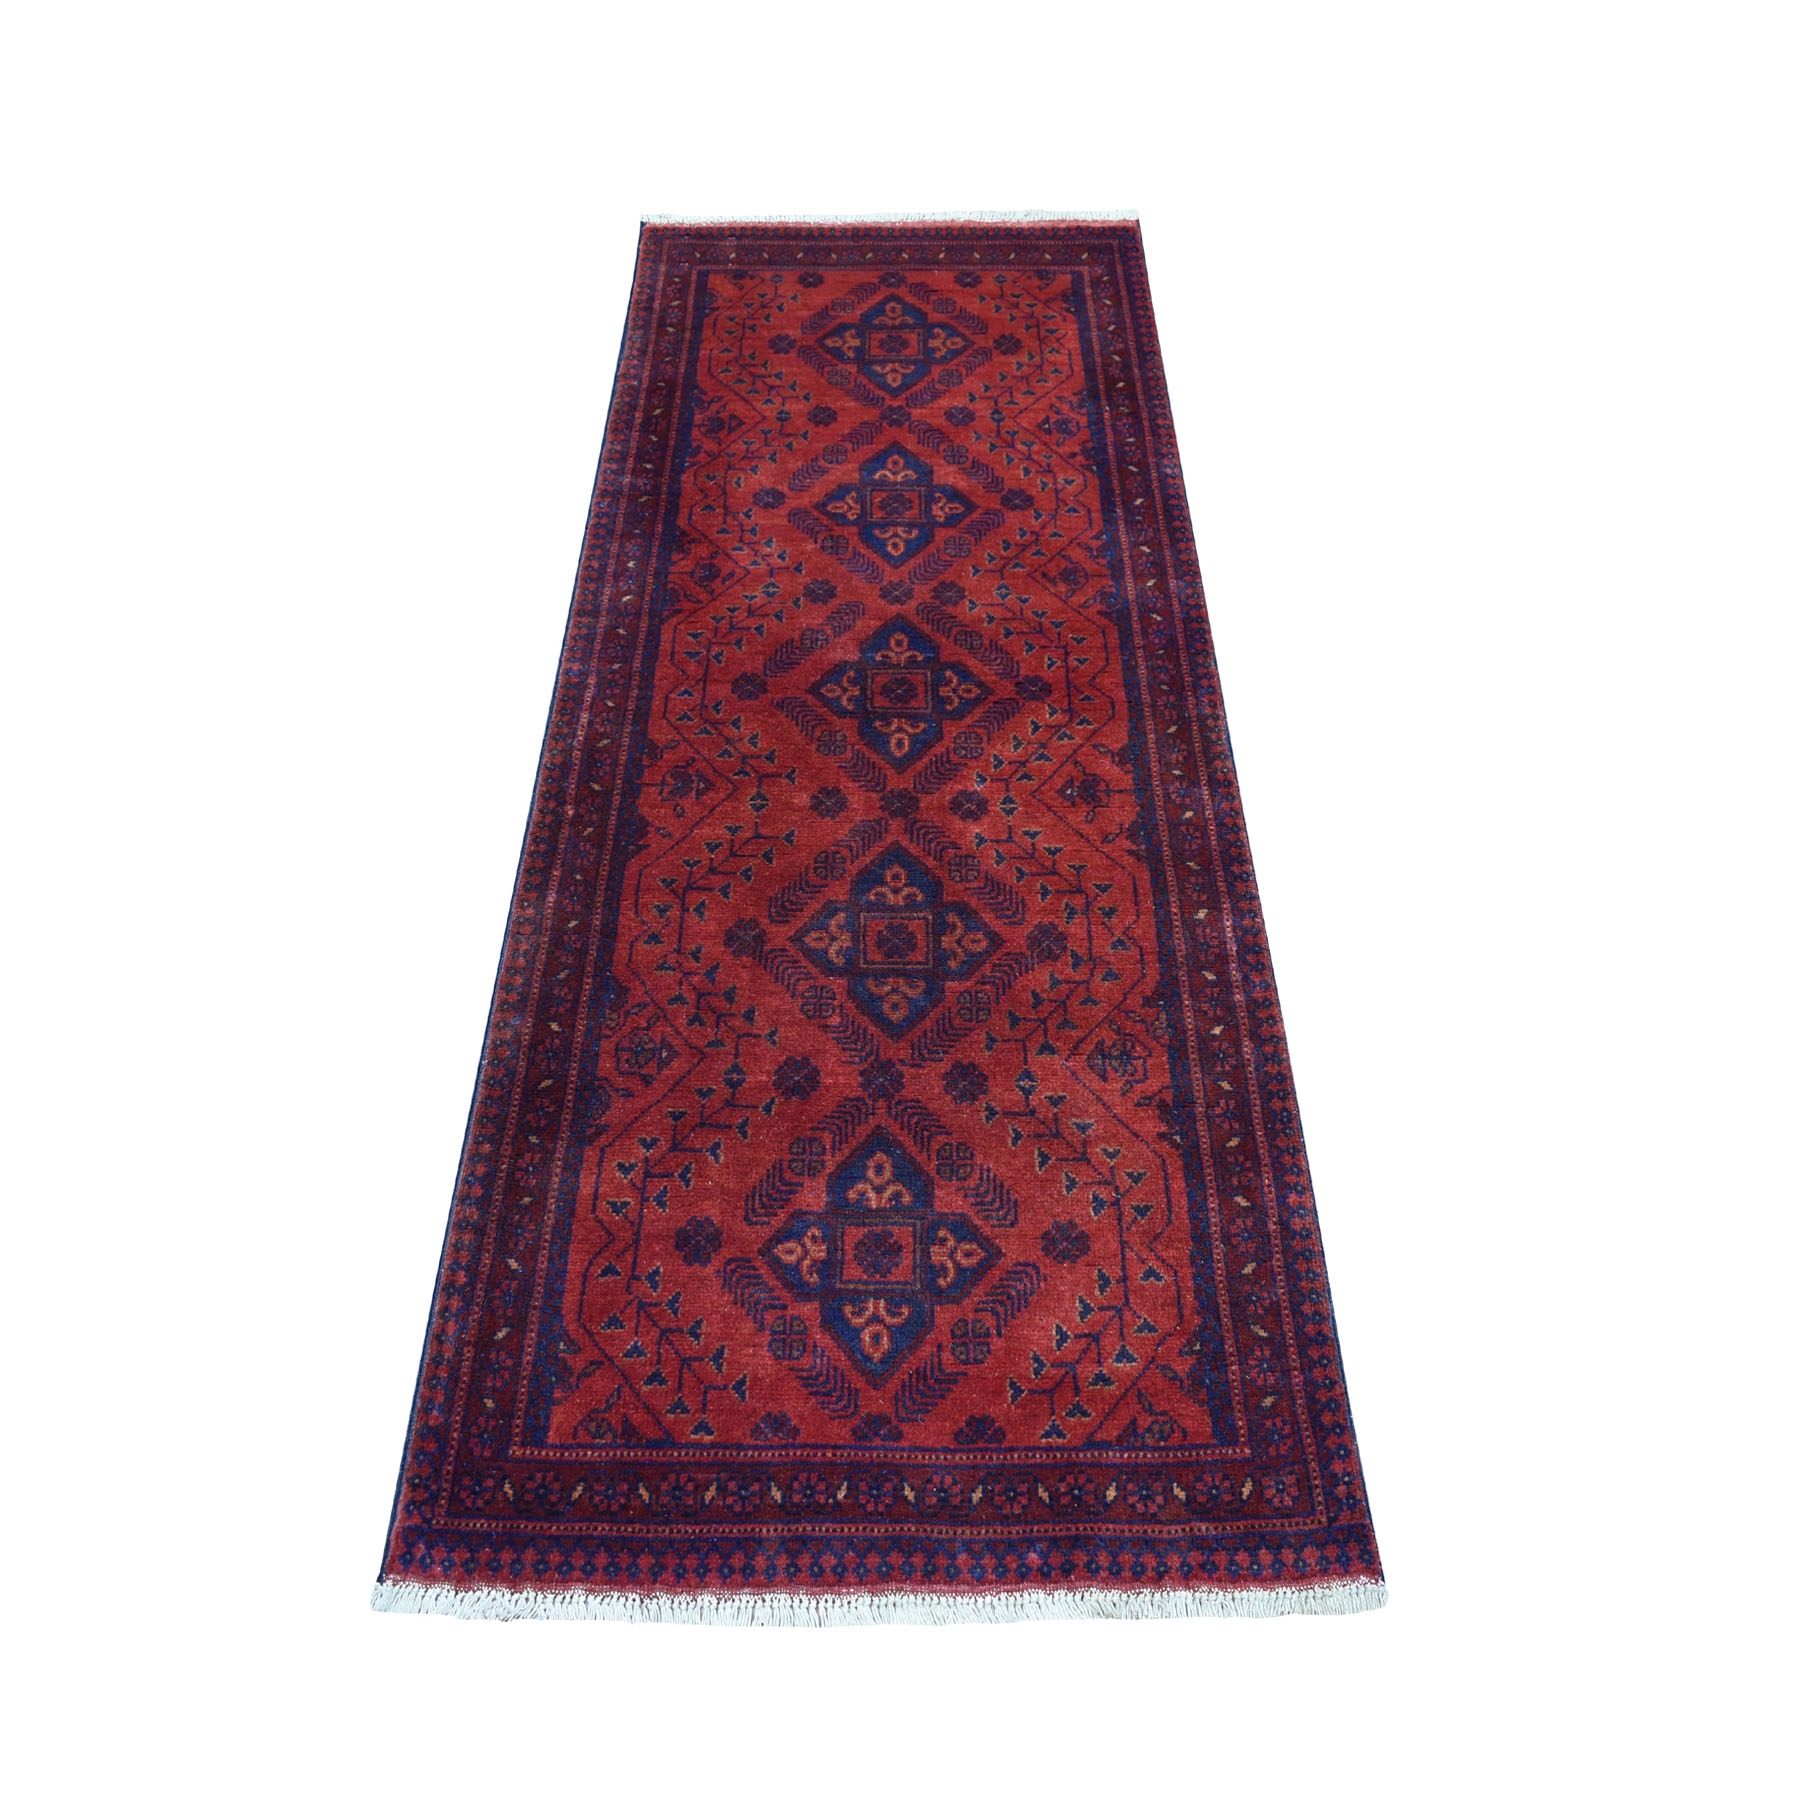 2'6"X6'1" Deep And Saturated Red Geometric Afghan Andkhoy Runner Pure Wool Hand Knotted Oriental Rug moaecee6